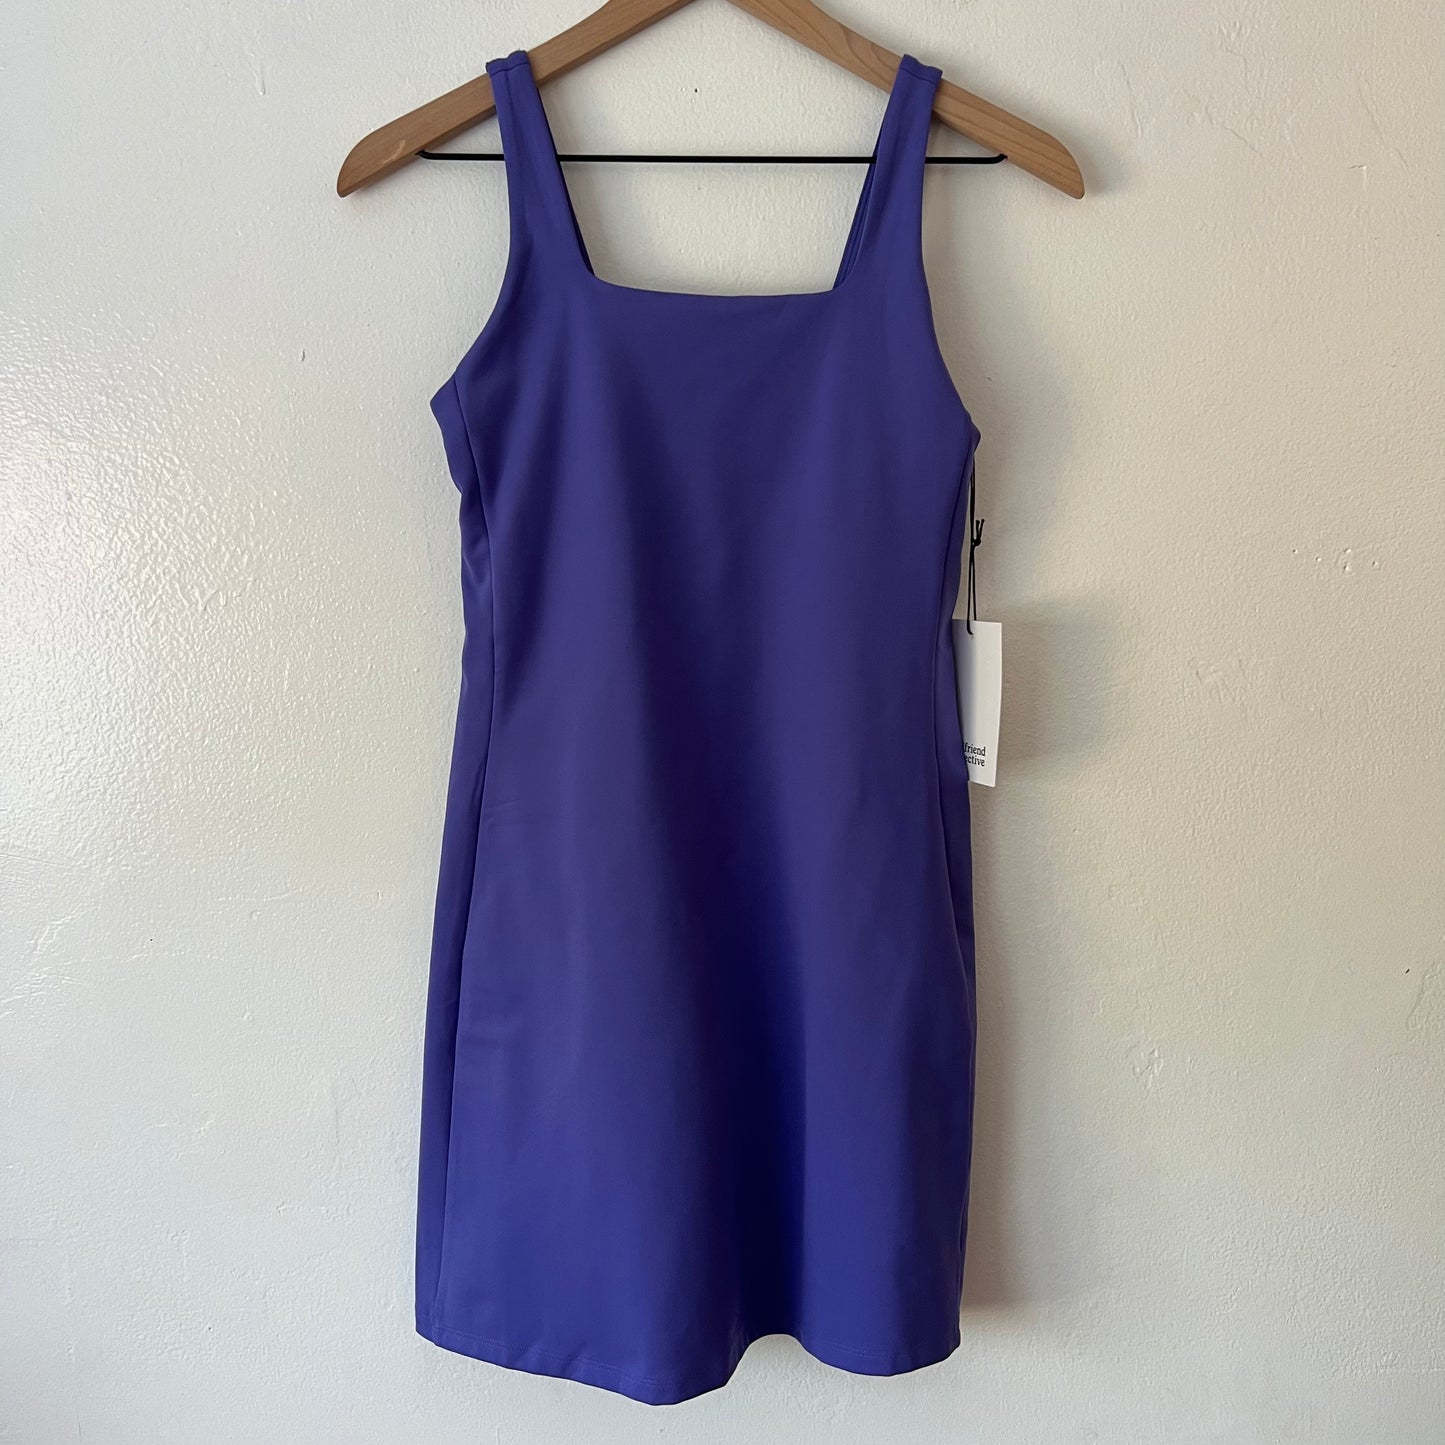 Girlfriend Collective Tommy Dress